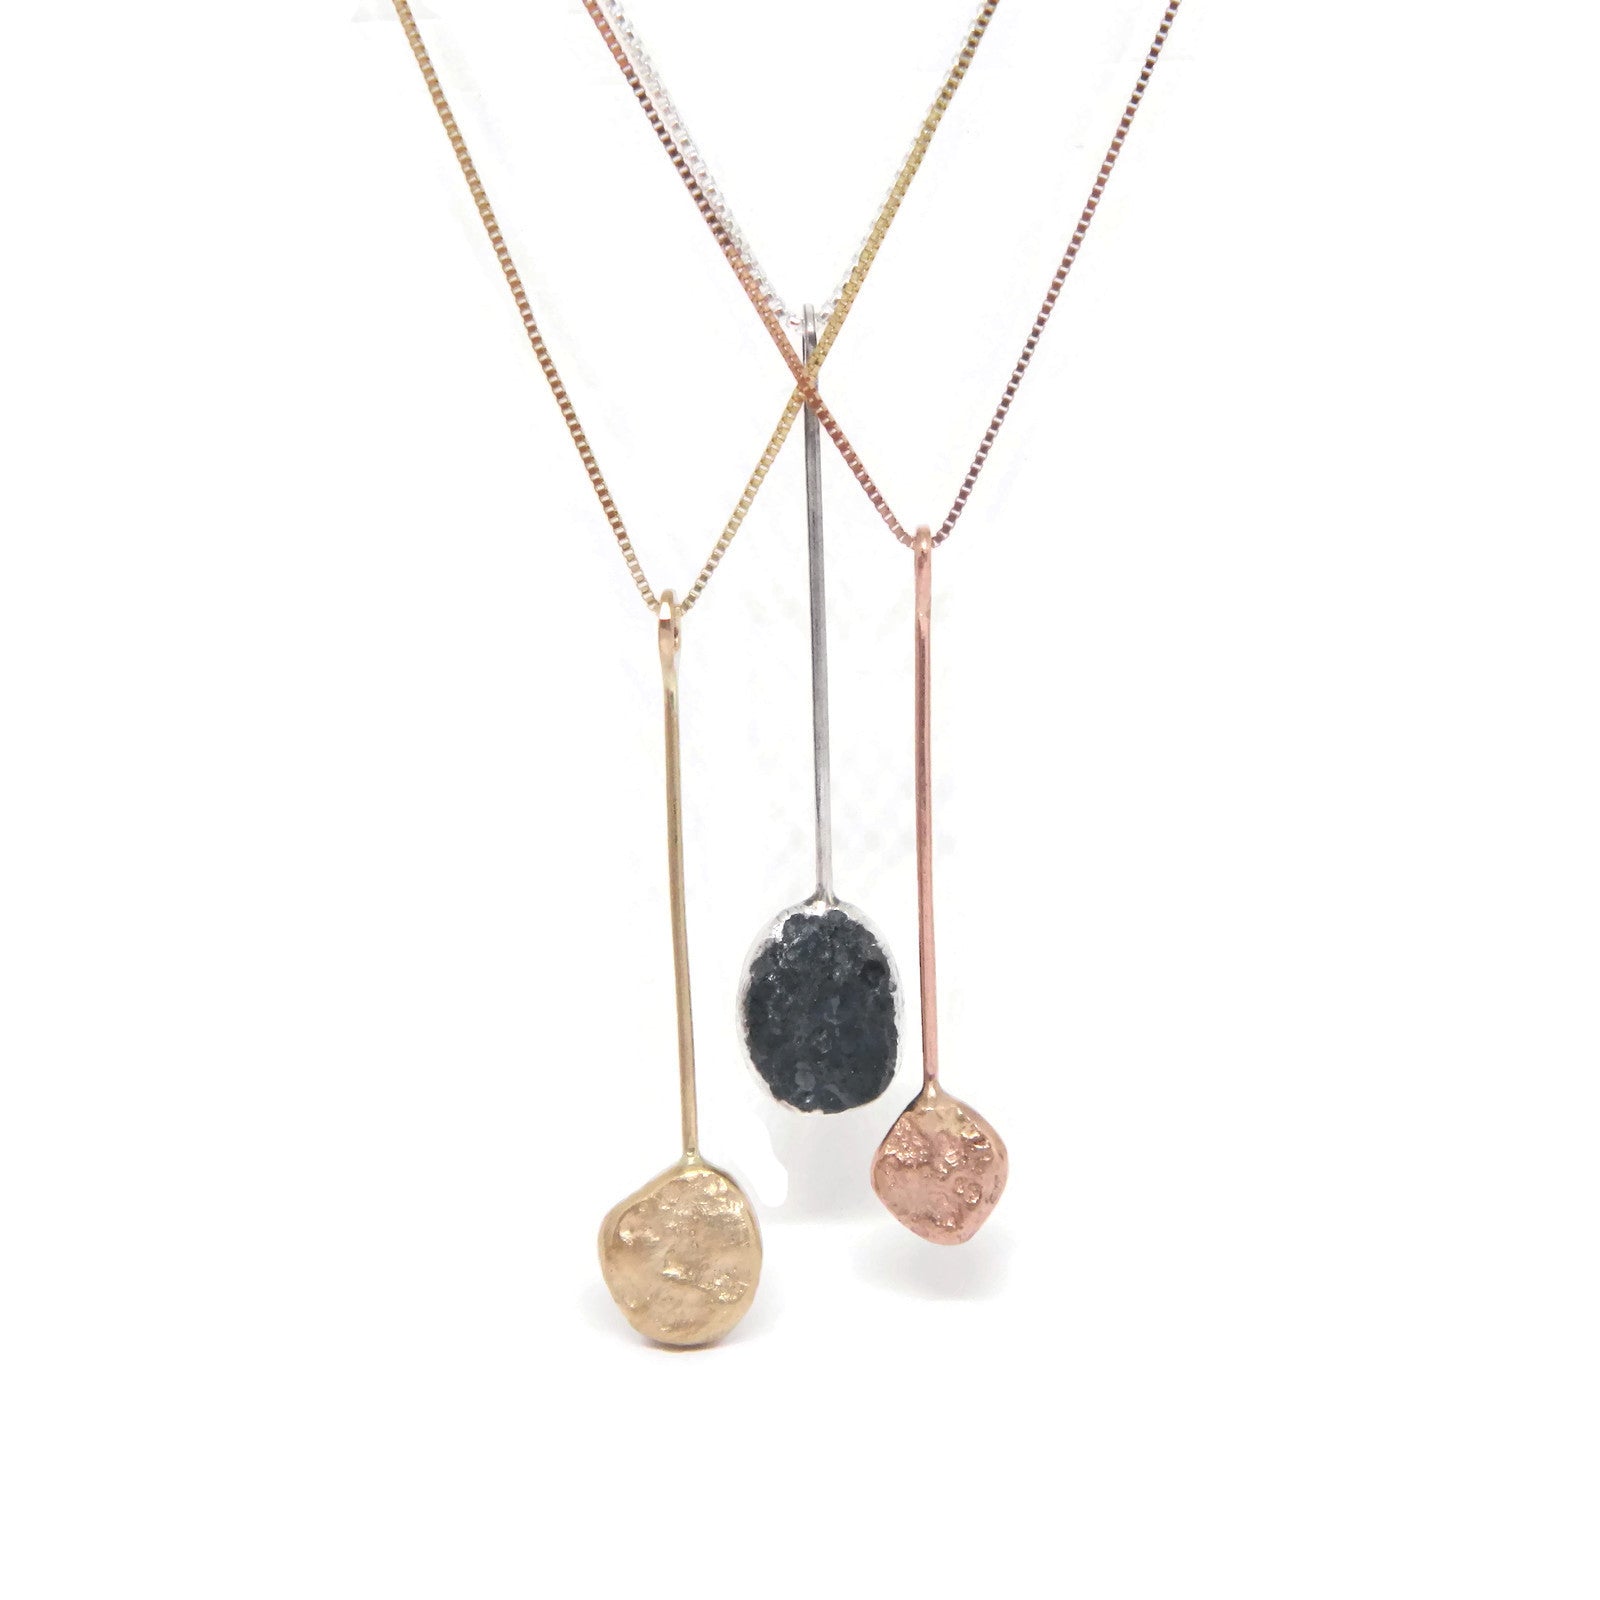 New Beach Rock Necklace Collection